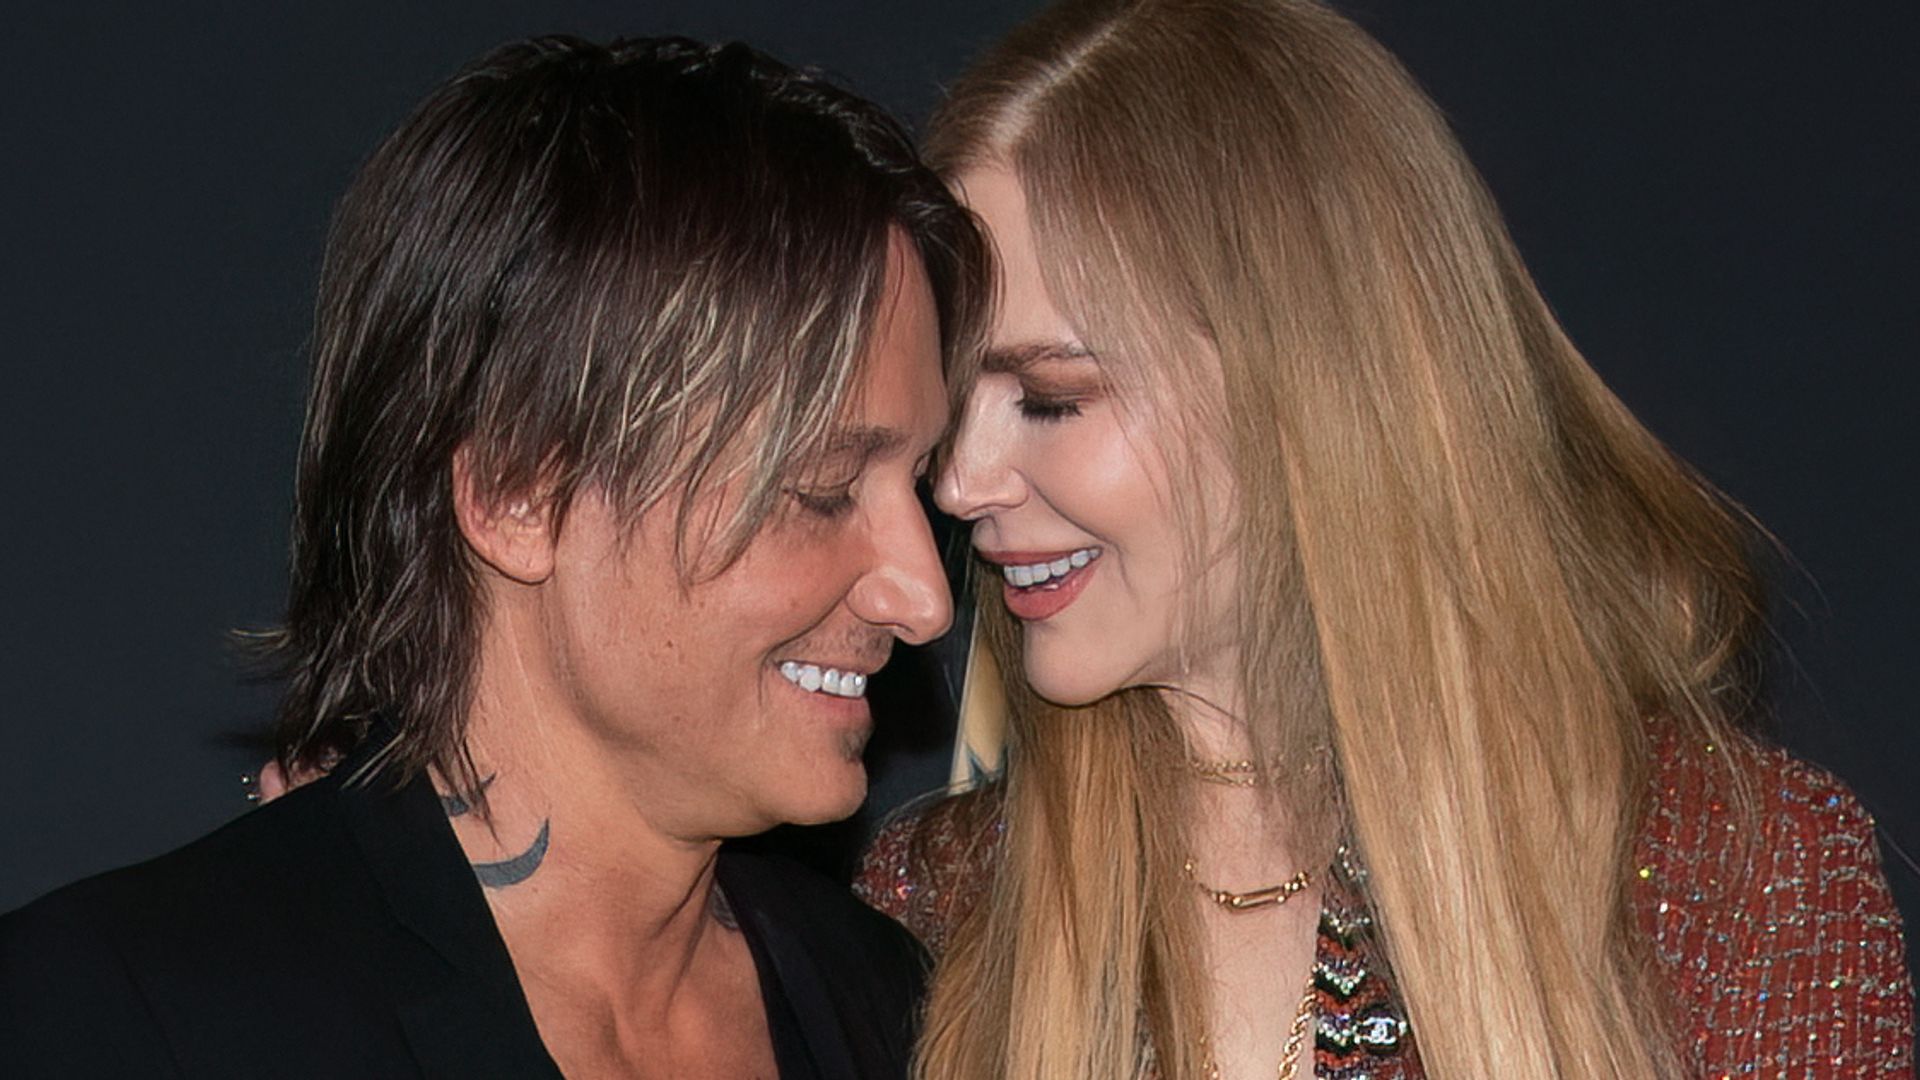 Nicole Kidman and Keith Urban laughing and smiling at each other on a red carpet